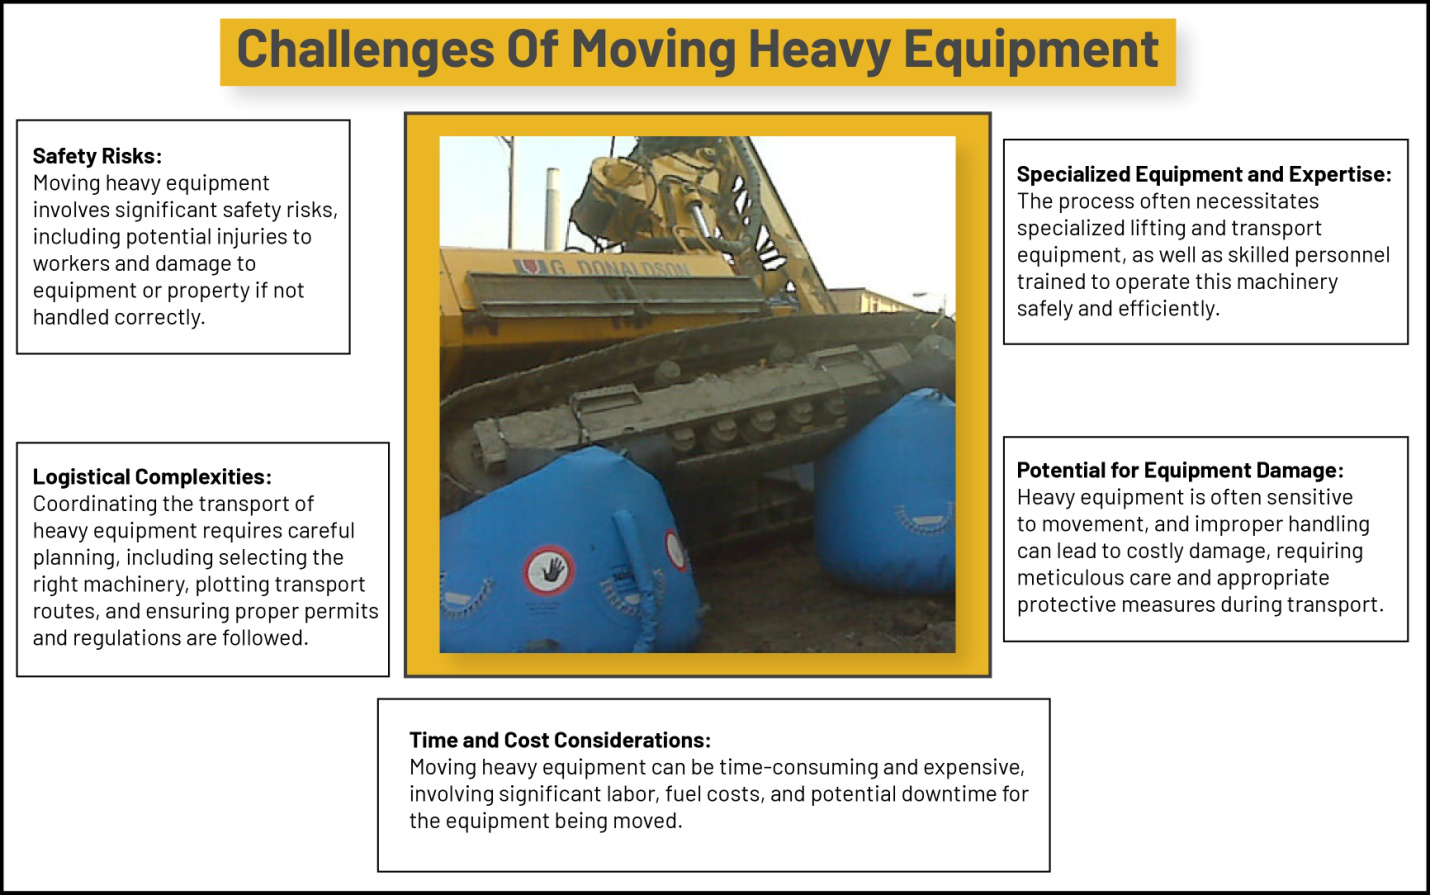 An infographic explaining the challenges of moving heavy equipment